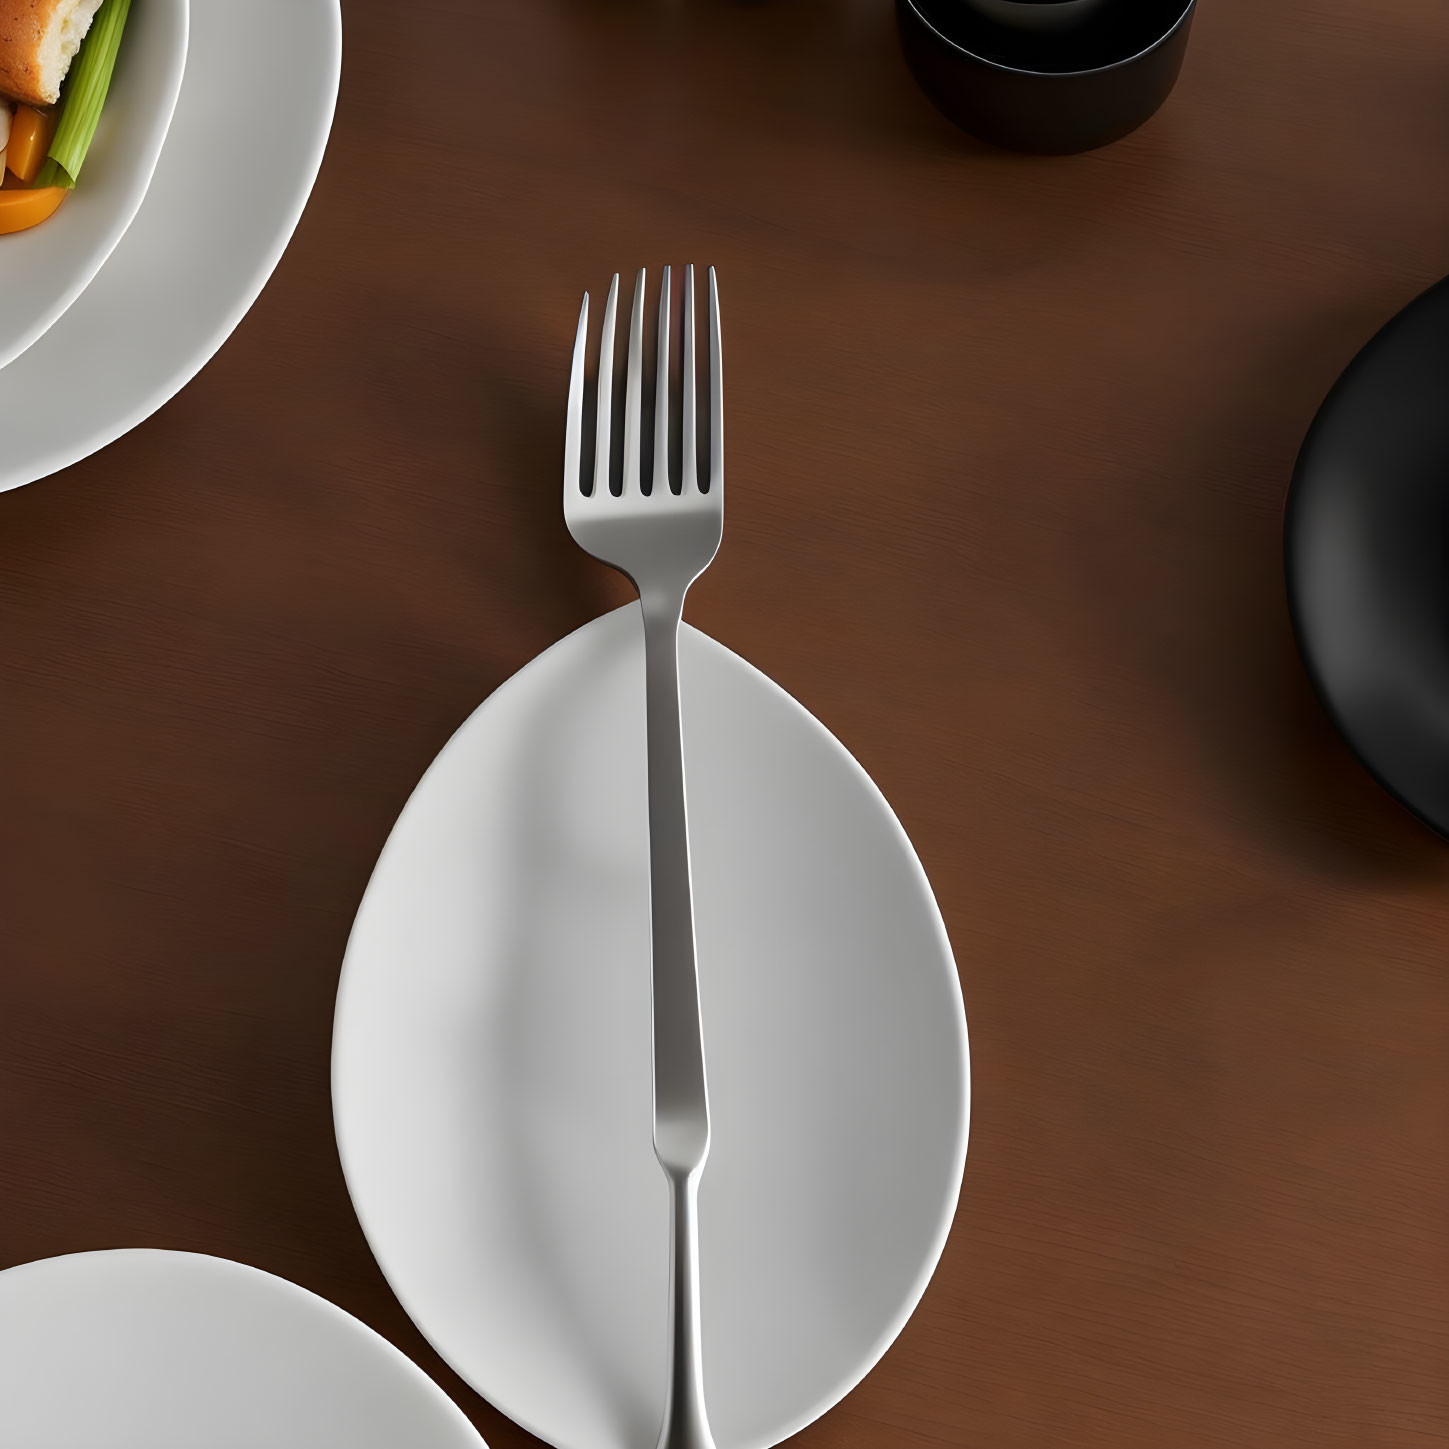 Metal fork on white plate in modern table setting with dishes and cup